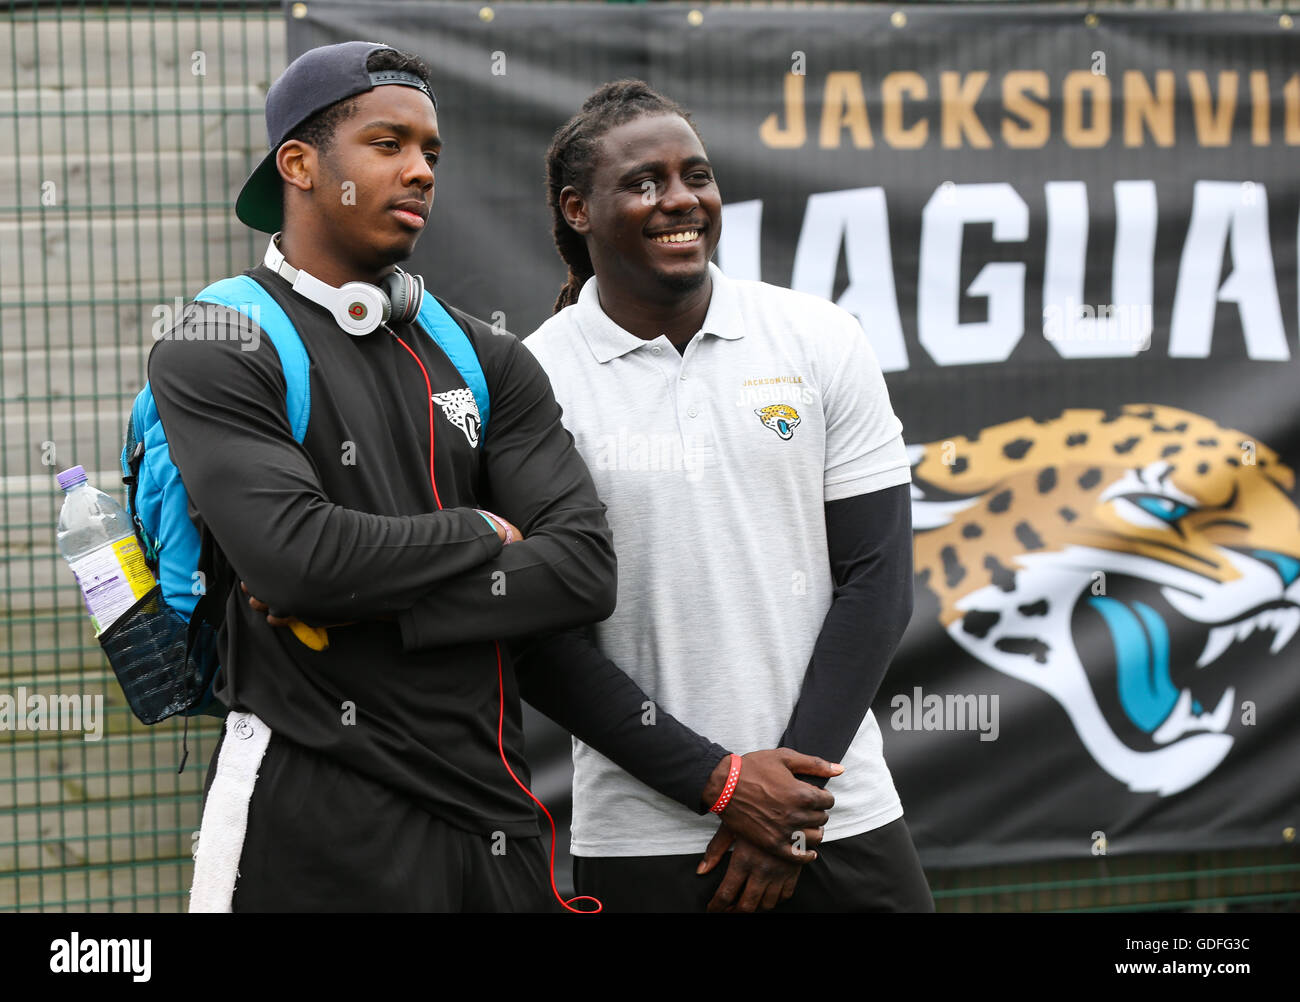 Denard Robinson (right) with a student during the Jacksonville Jaguars academy day at Loughborough University. PRESS ASSOCIATION Photo. Picture date: Friday July 15, 2016. Photo credit should read: Barry Coombs/PA Wire Stock Photo